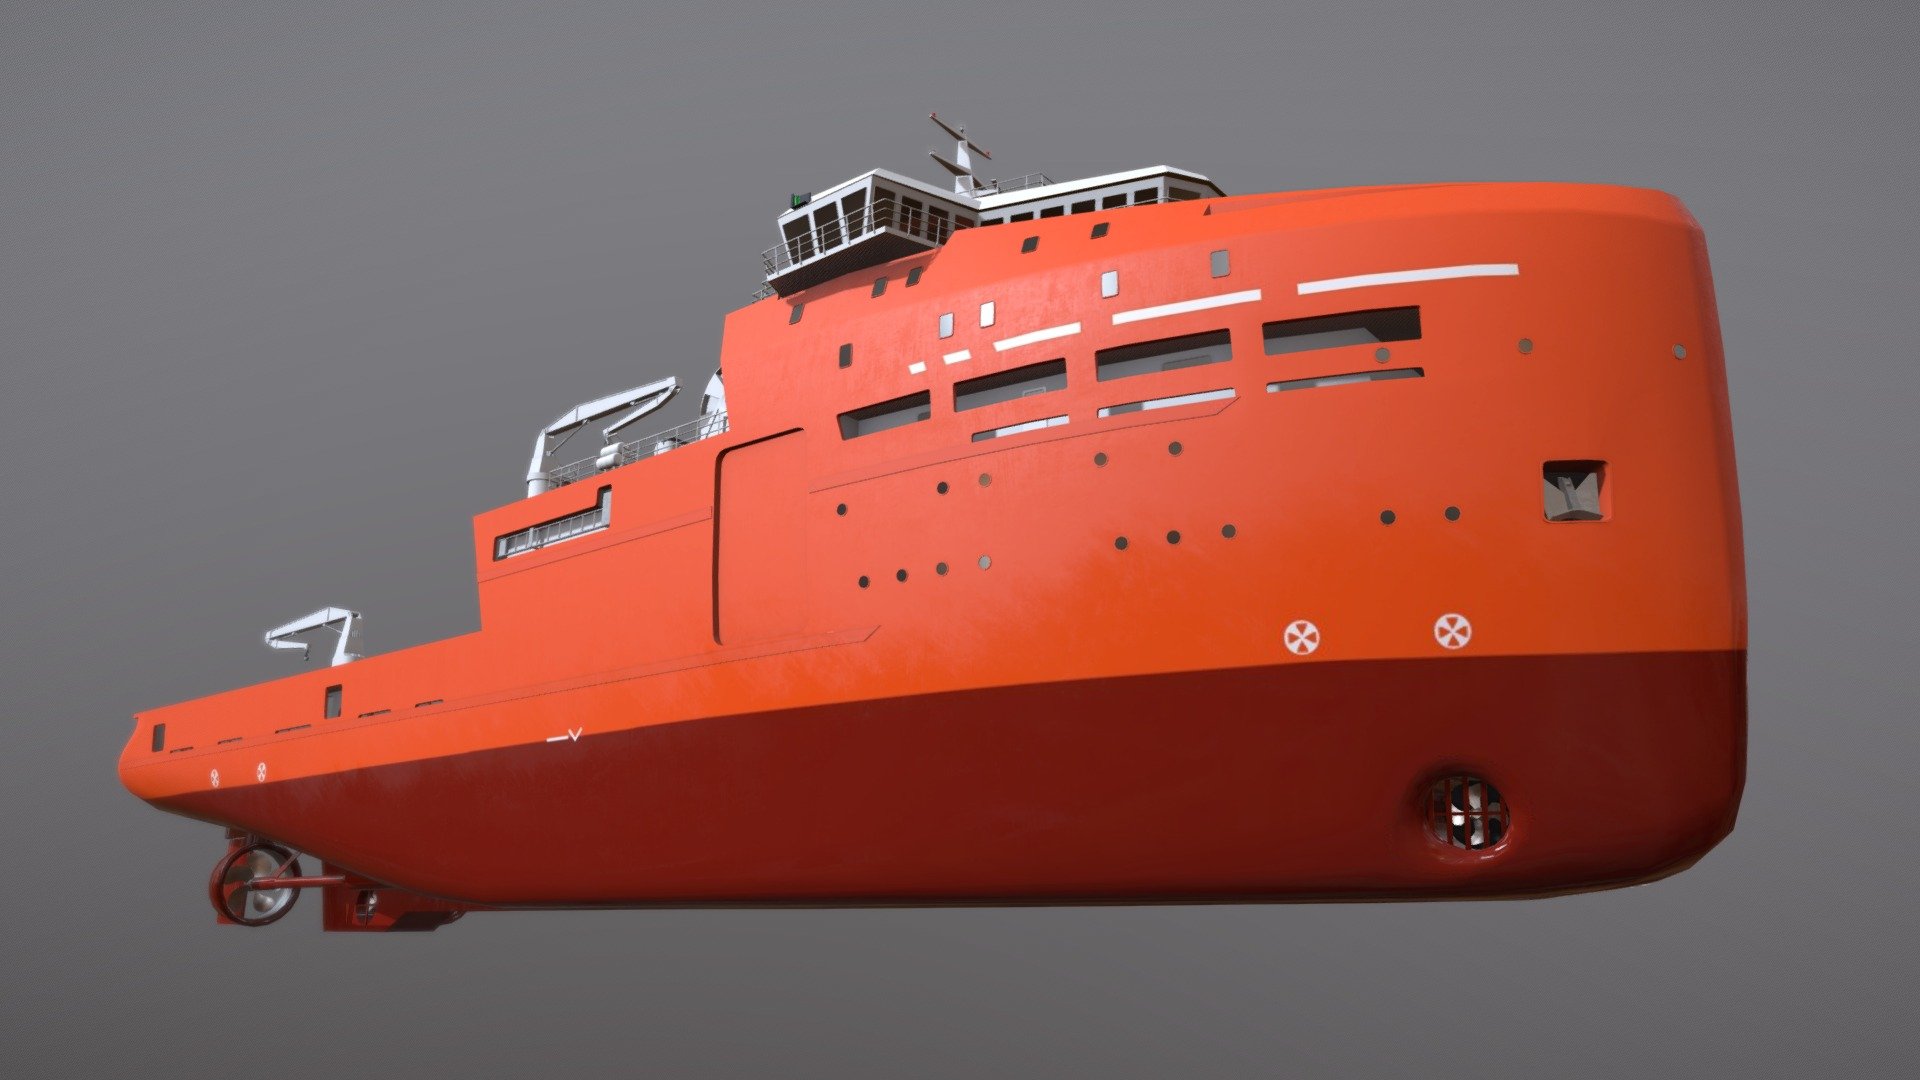 DAMEN - Anchor Handling Tug Supplier 200

3Ds max and Substance Painter are used for this model 3d model